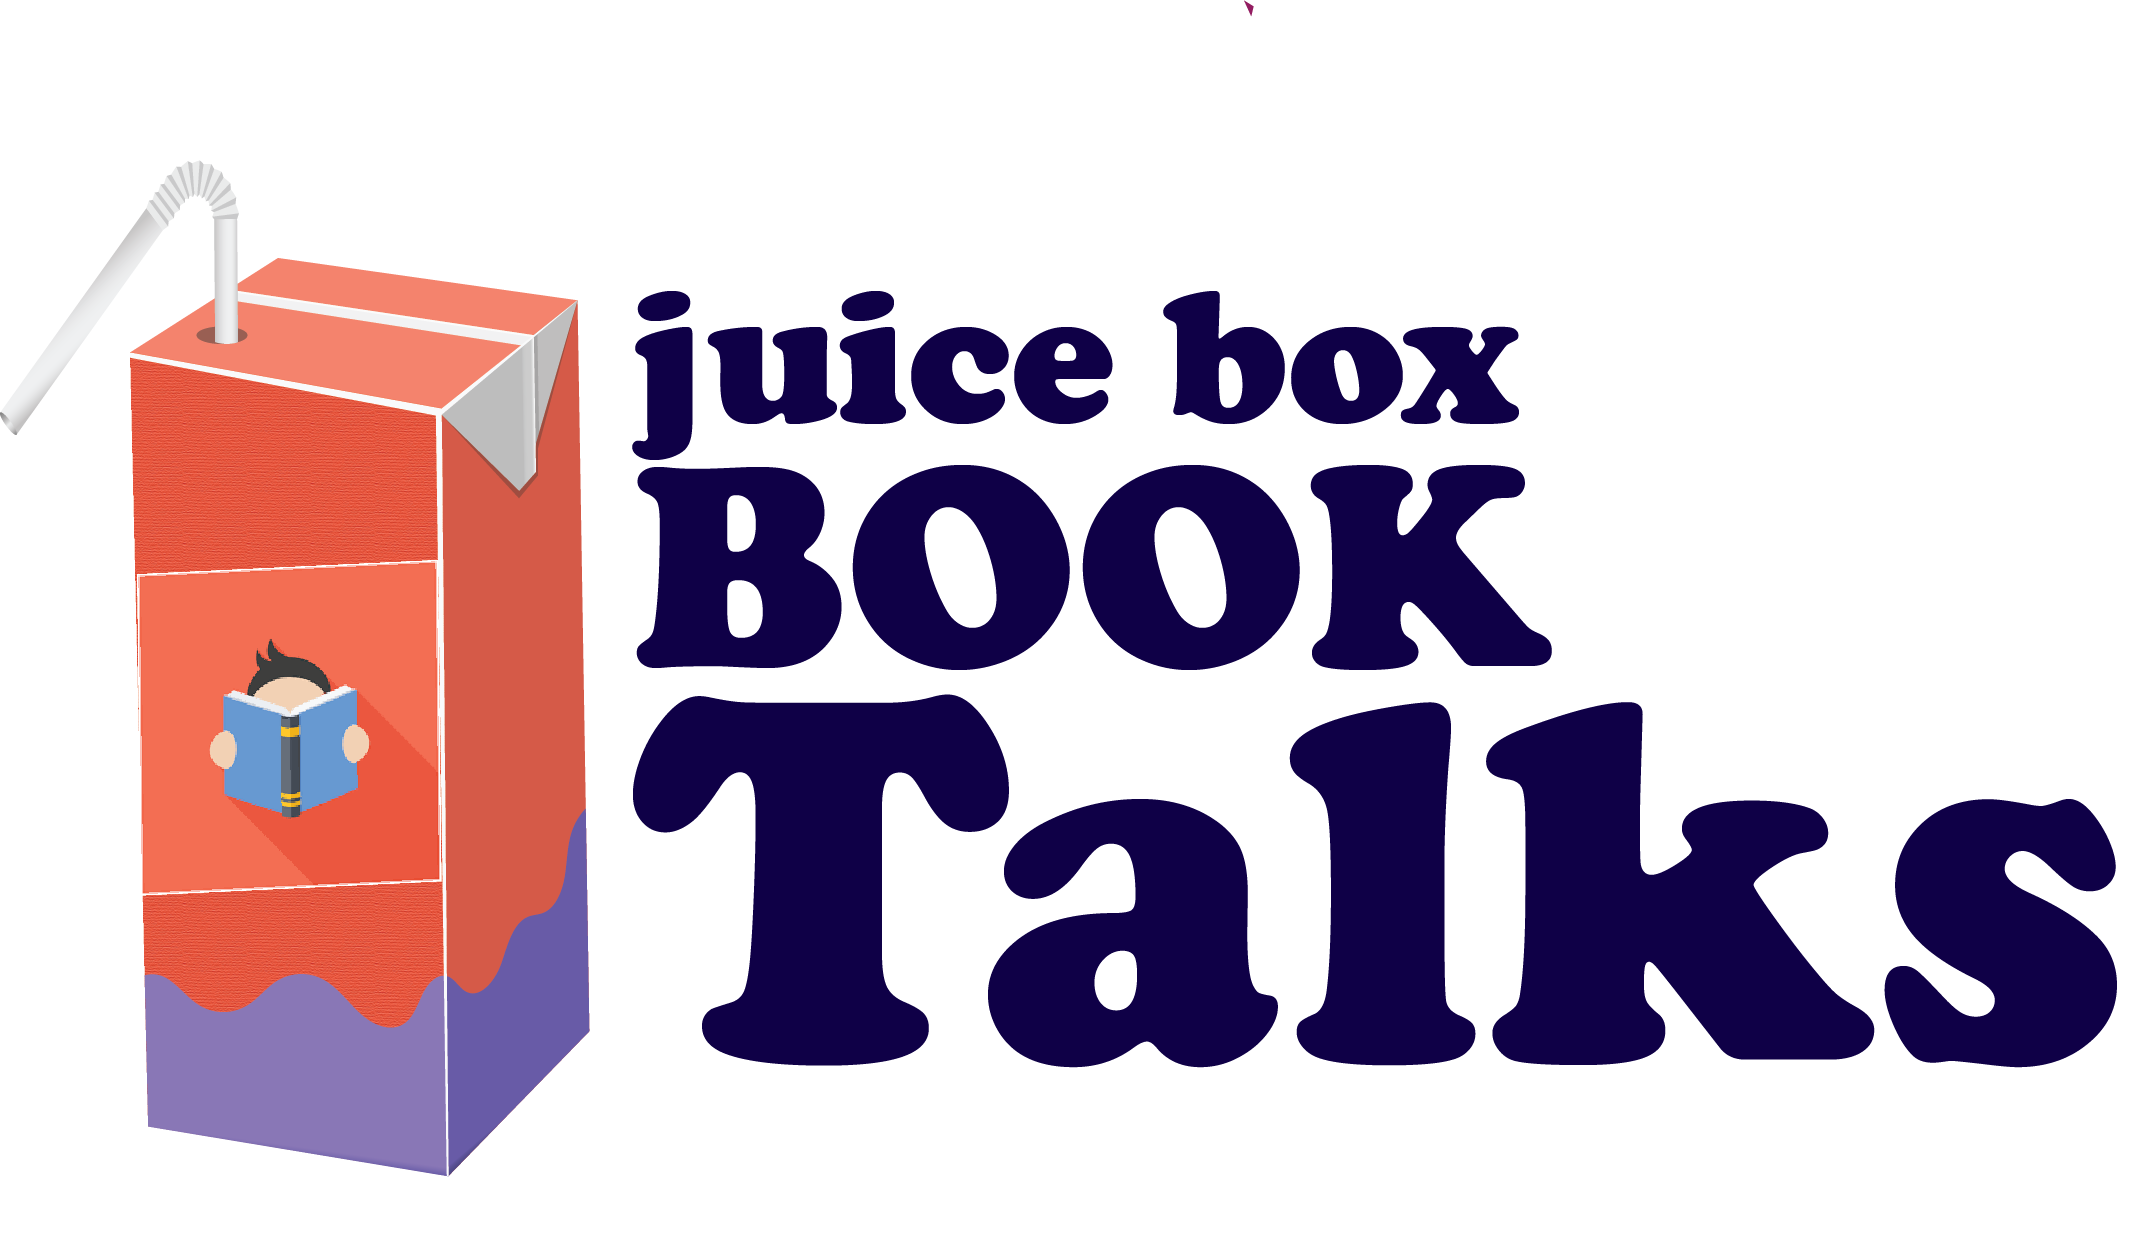 Cartoon image of juice box with a logo that looks like a child reading